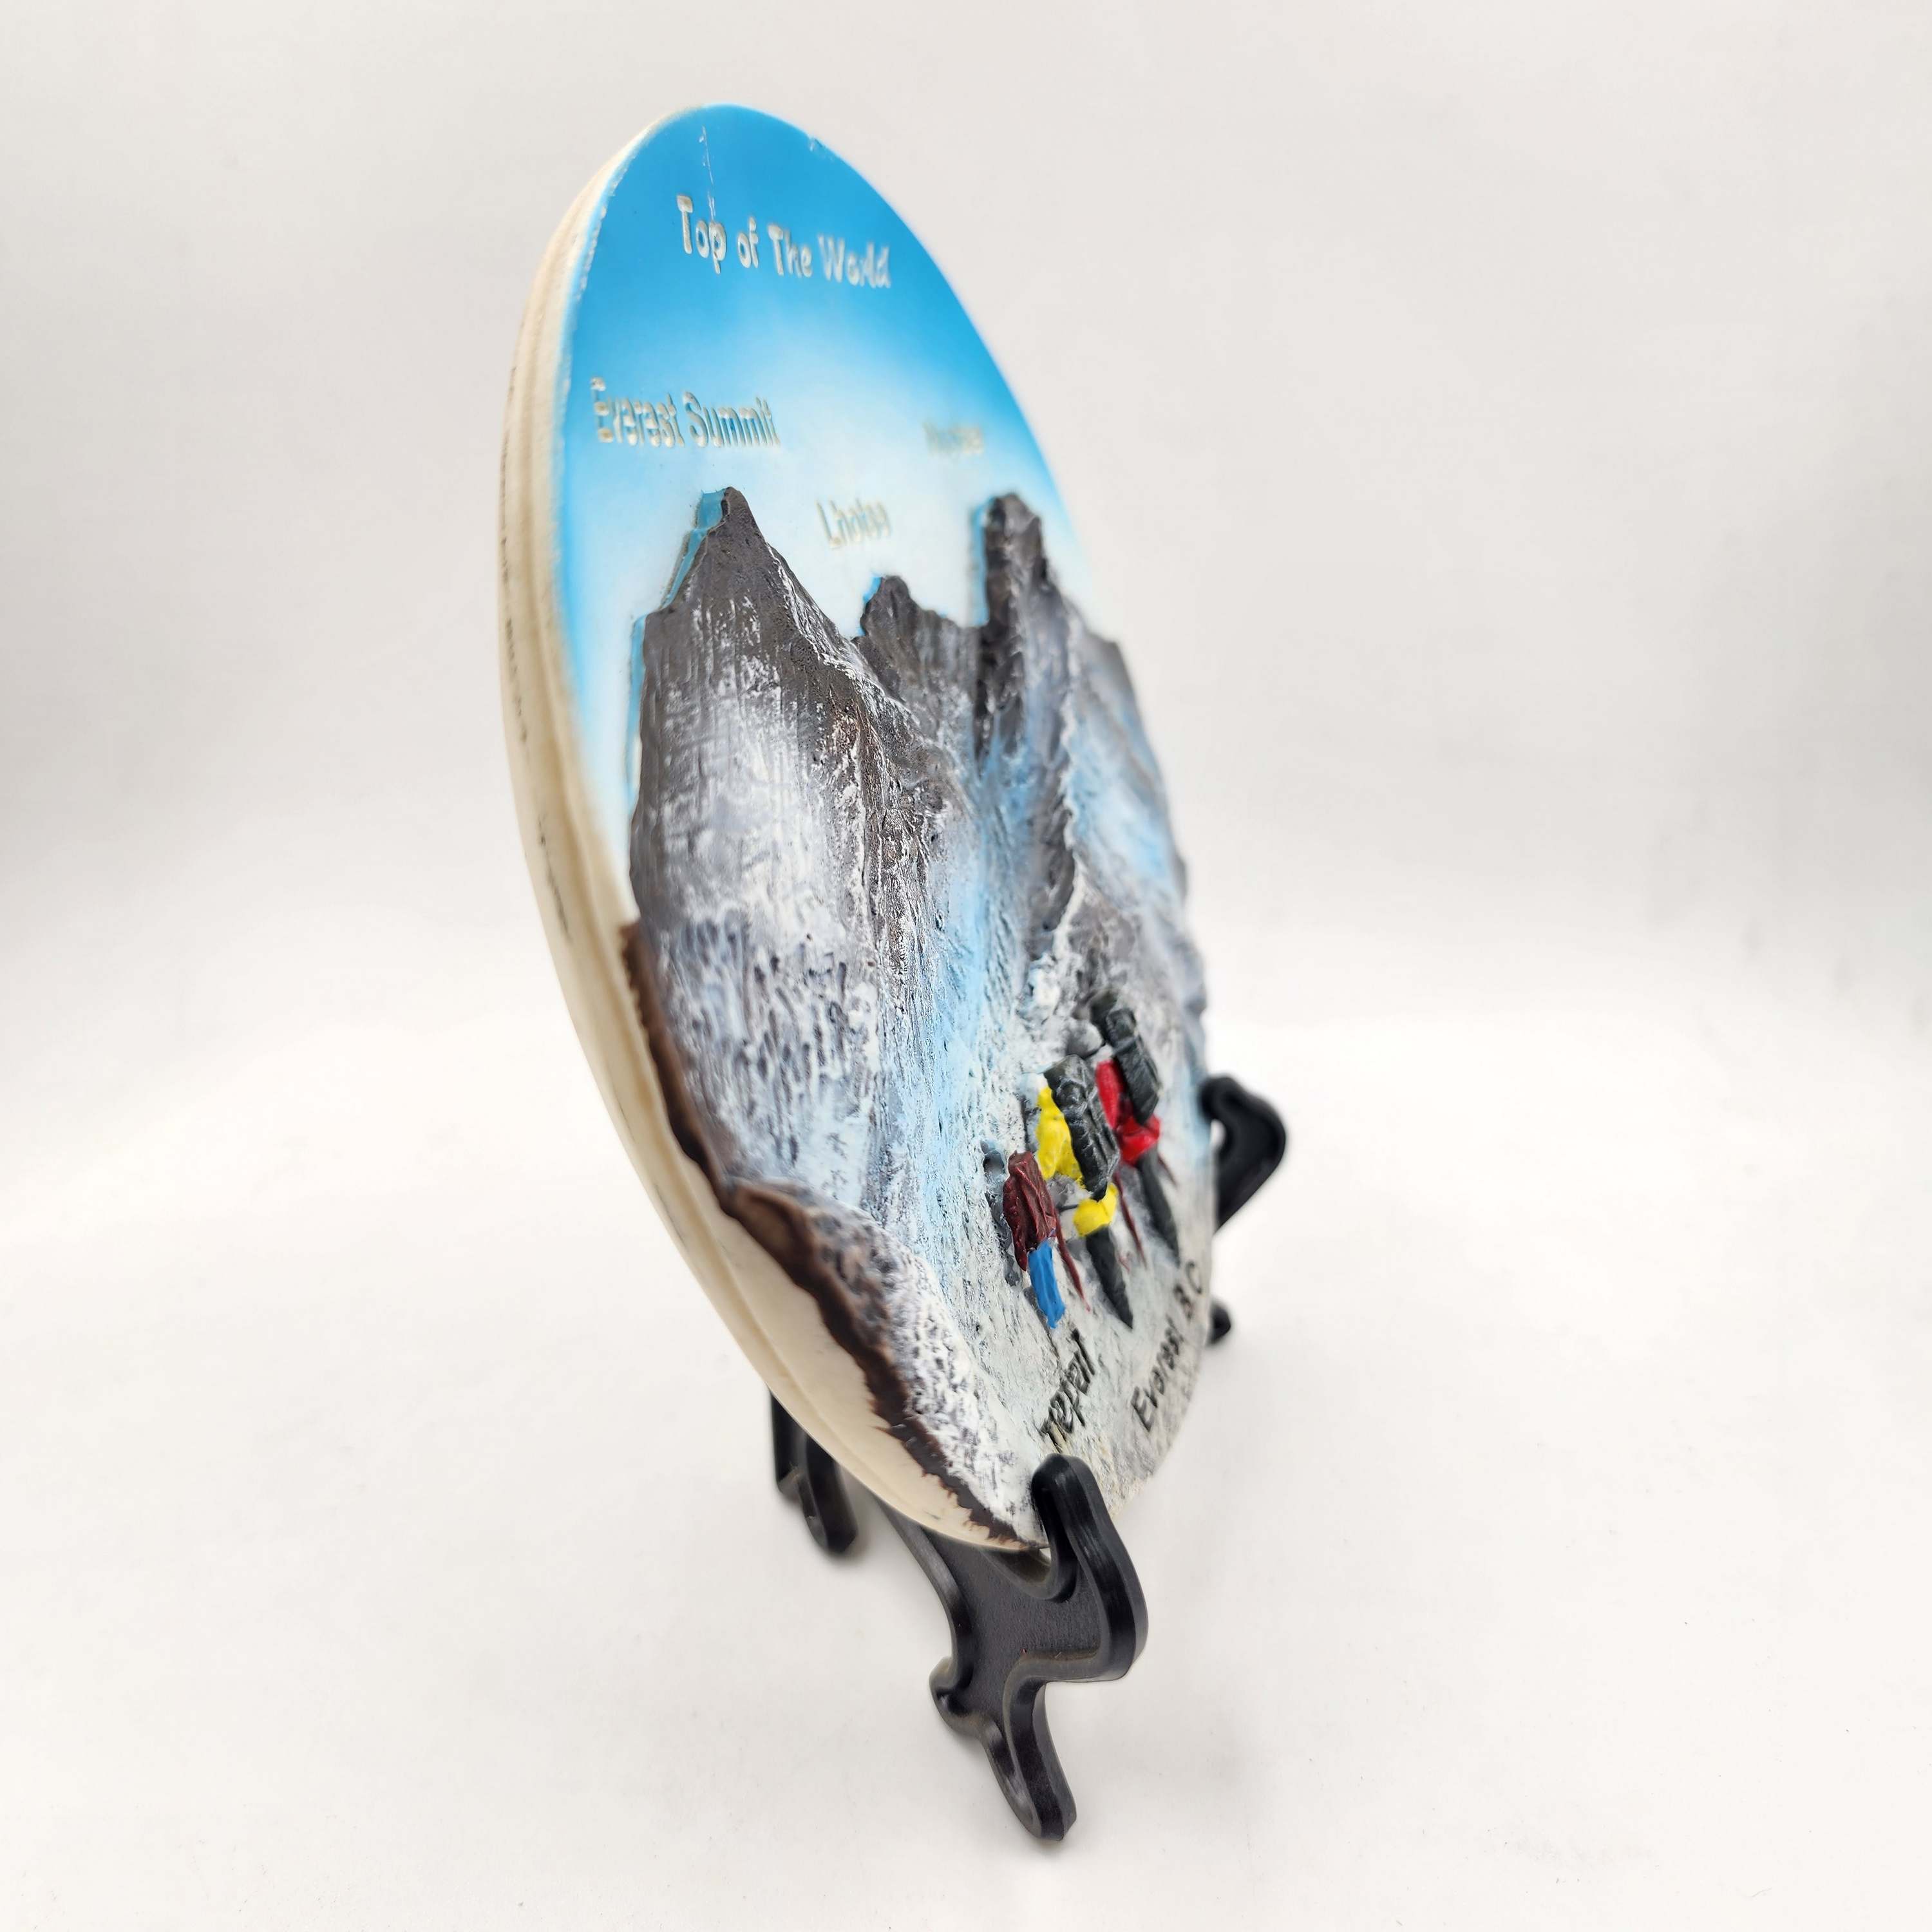 3d Fiber Art Of Mt. Everest Of Nepal With Stand And Wall Hanger, Ceramic Plate, Souvenir